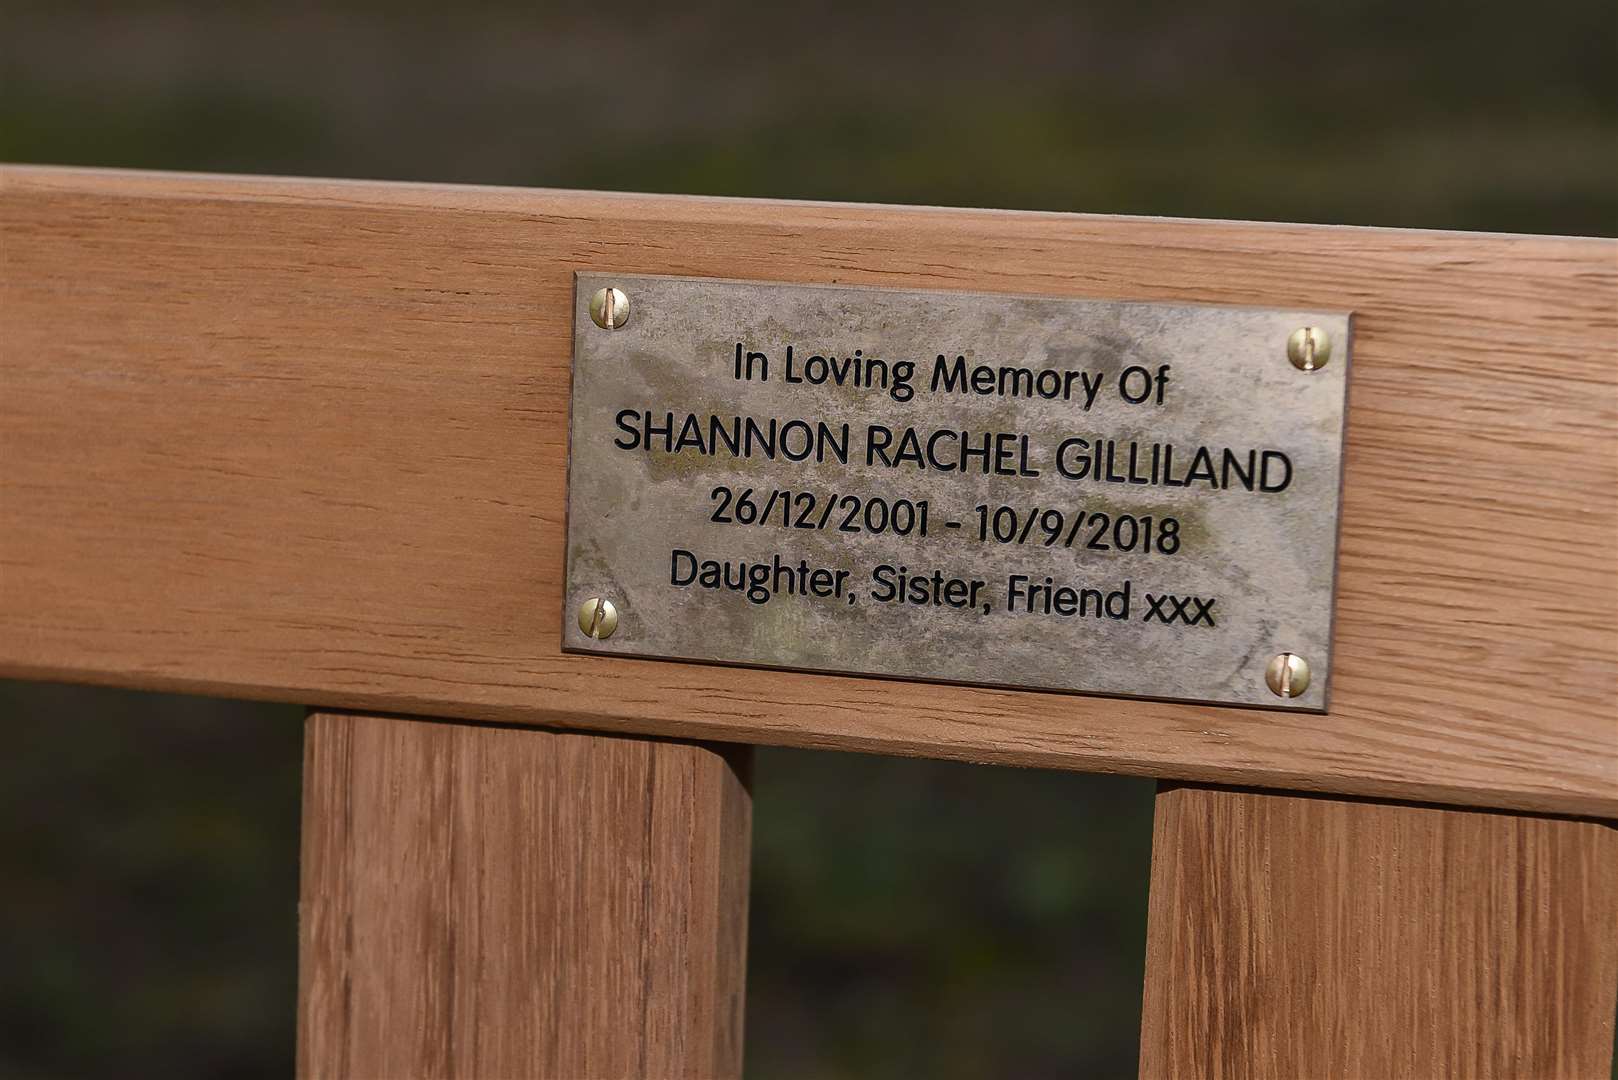 Shannon Gilliland's bench was paid for with donations by friends in a Justgiving fundraising appeal